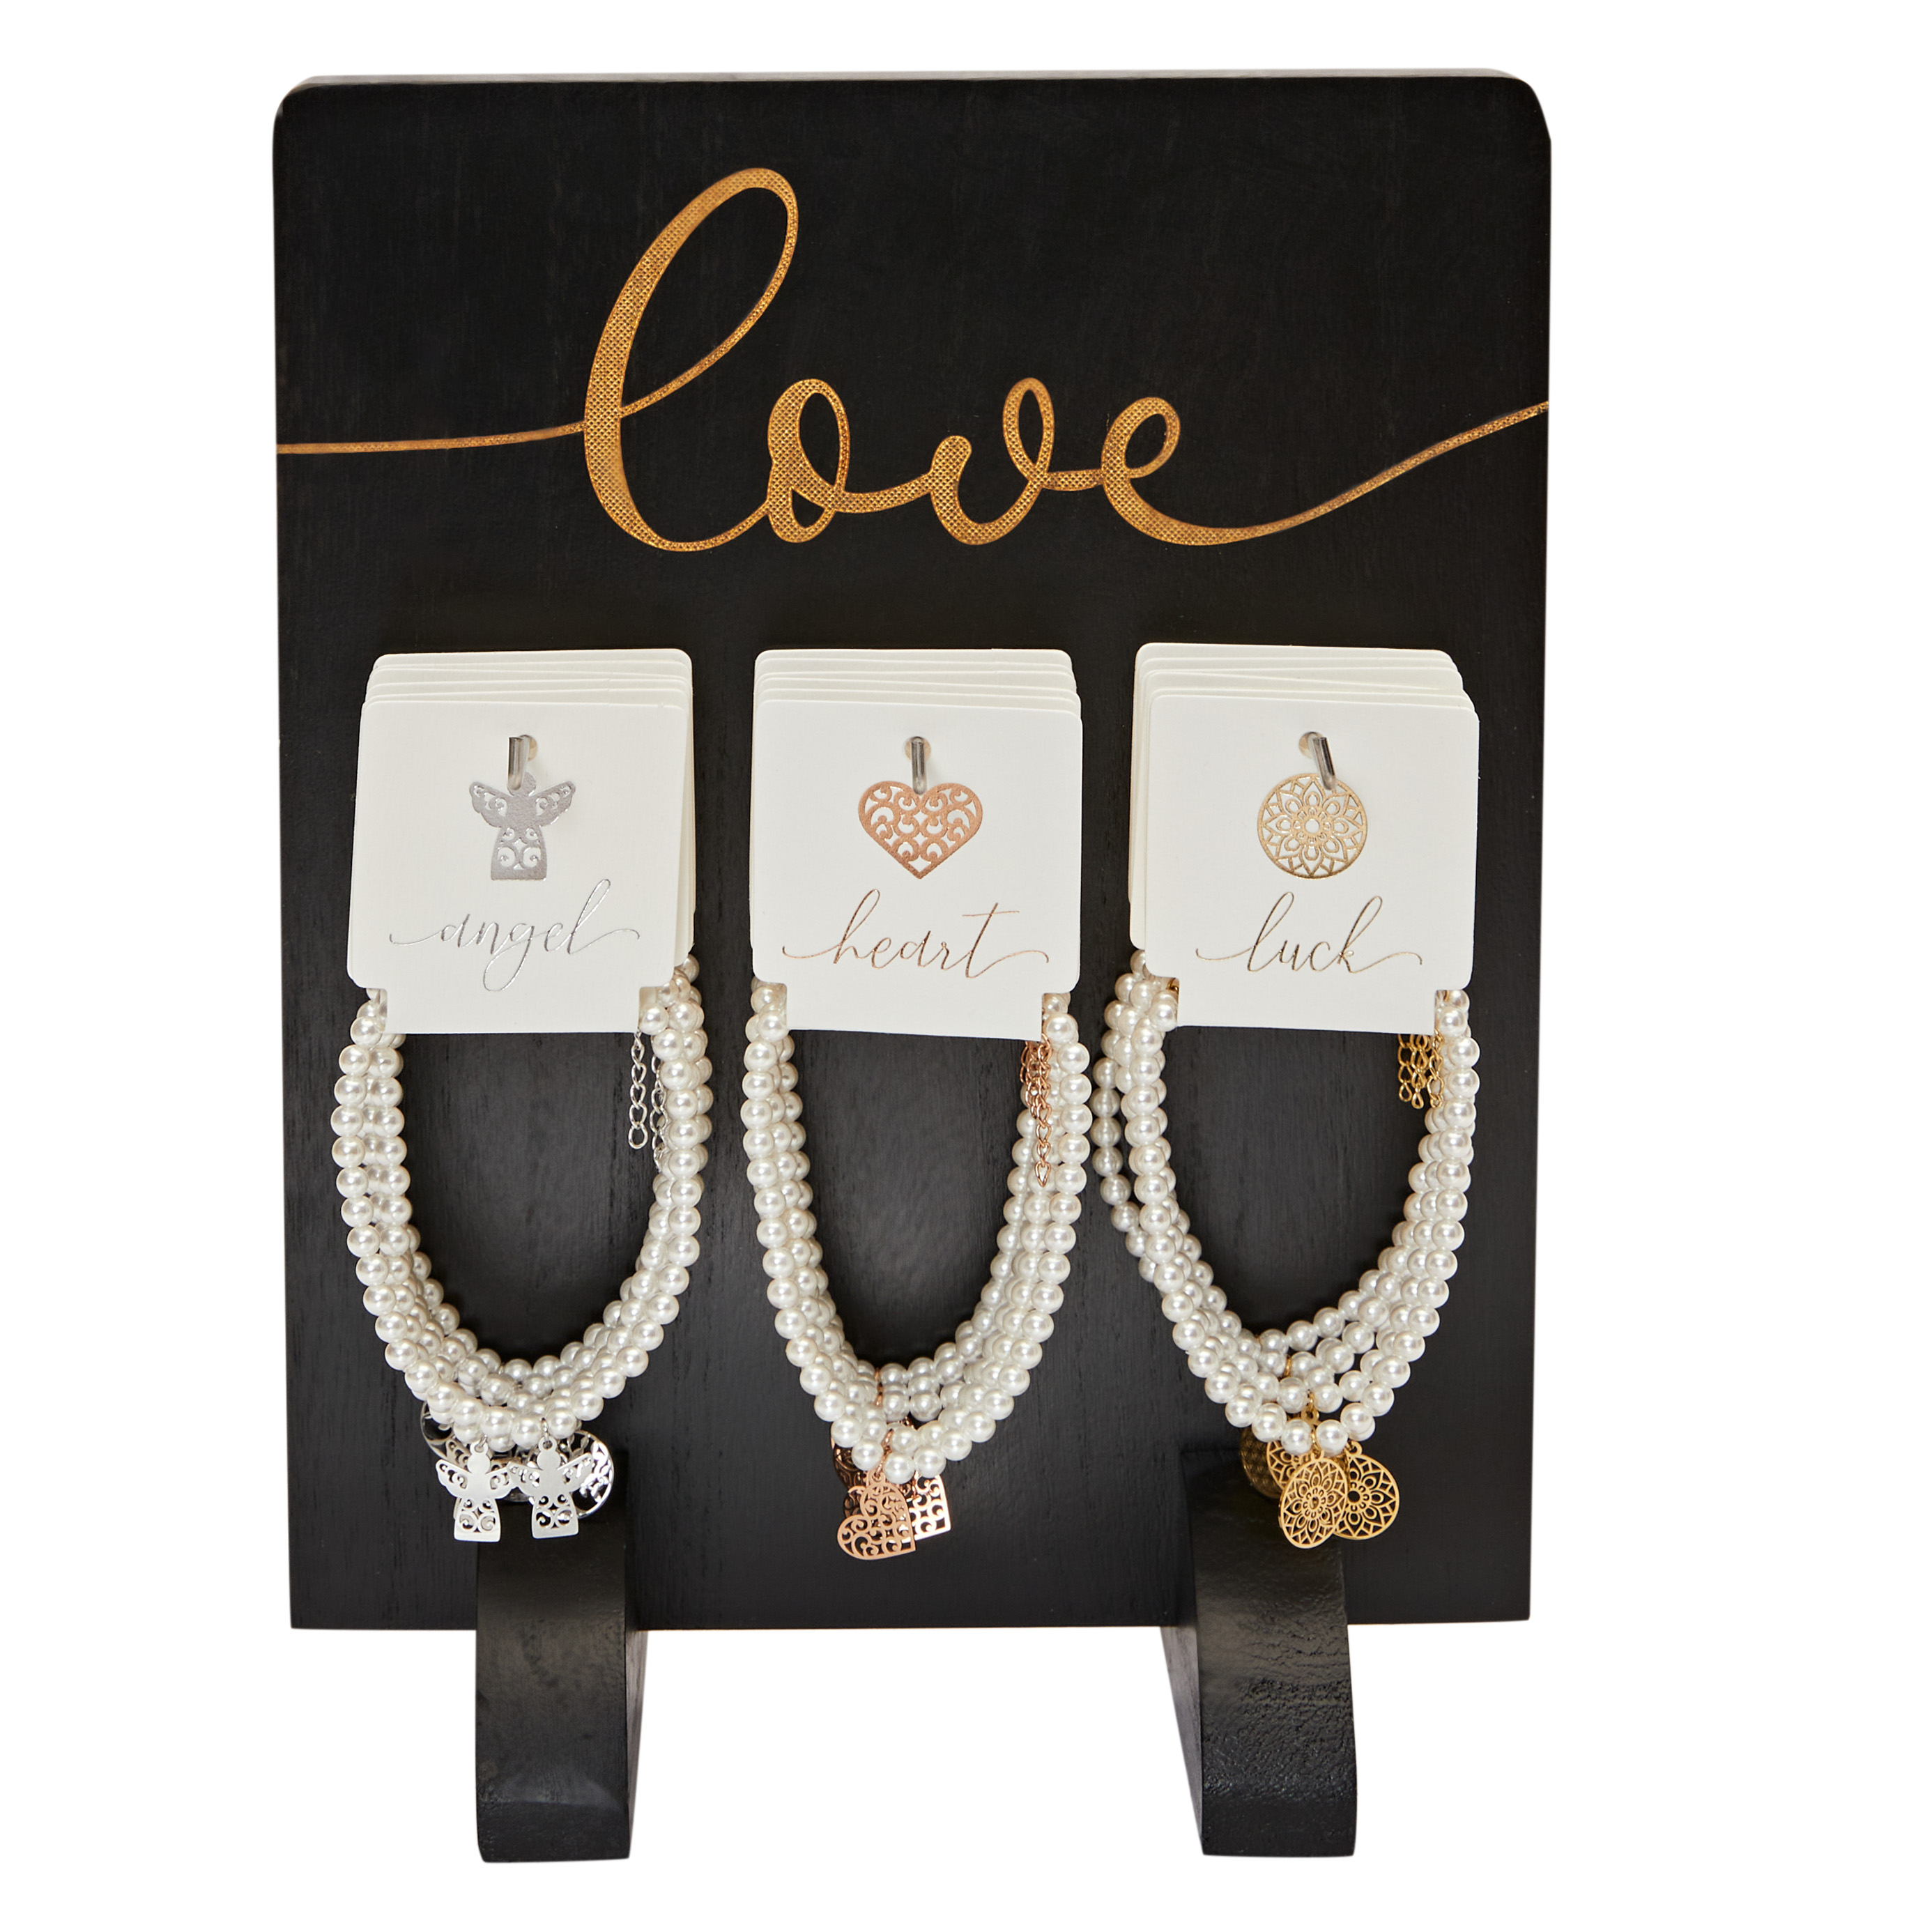 Display package pearl bracelets with symbol